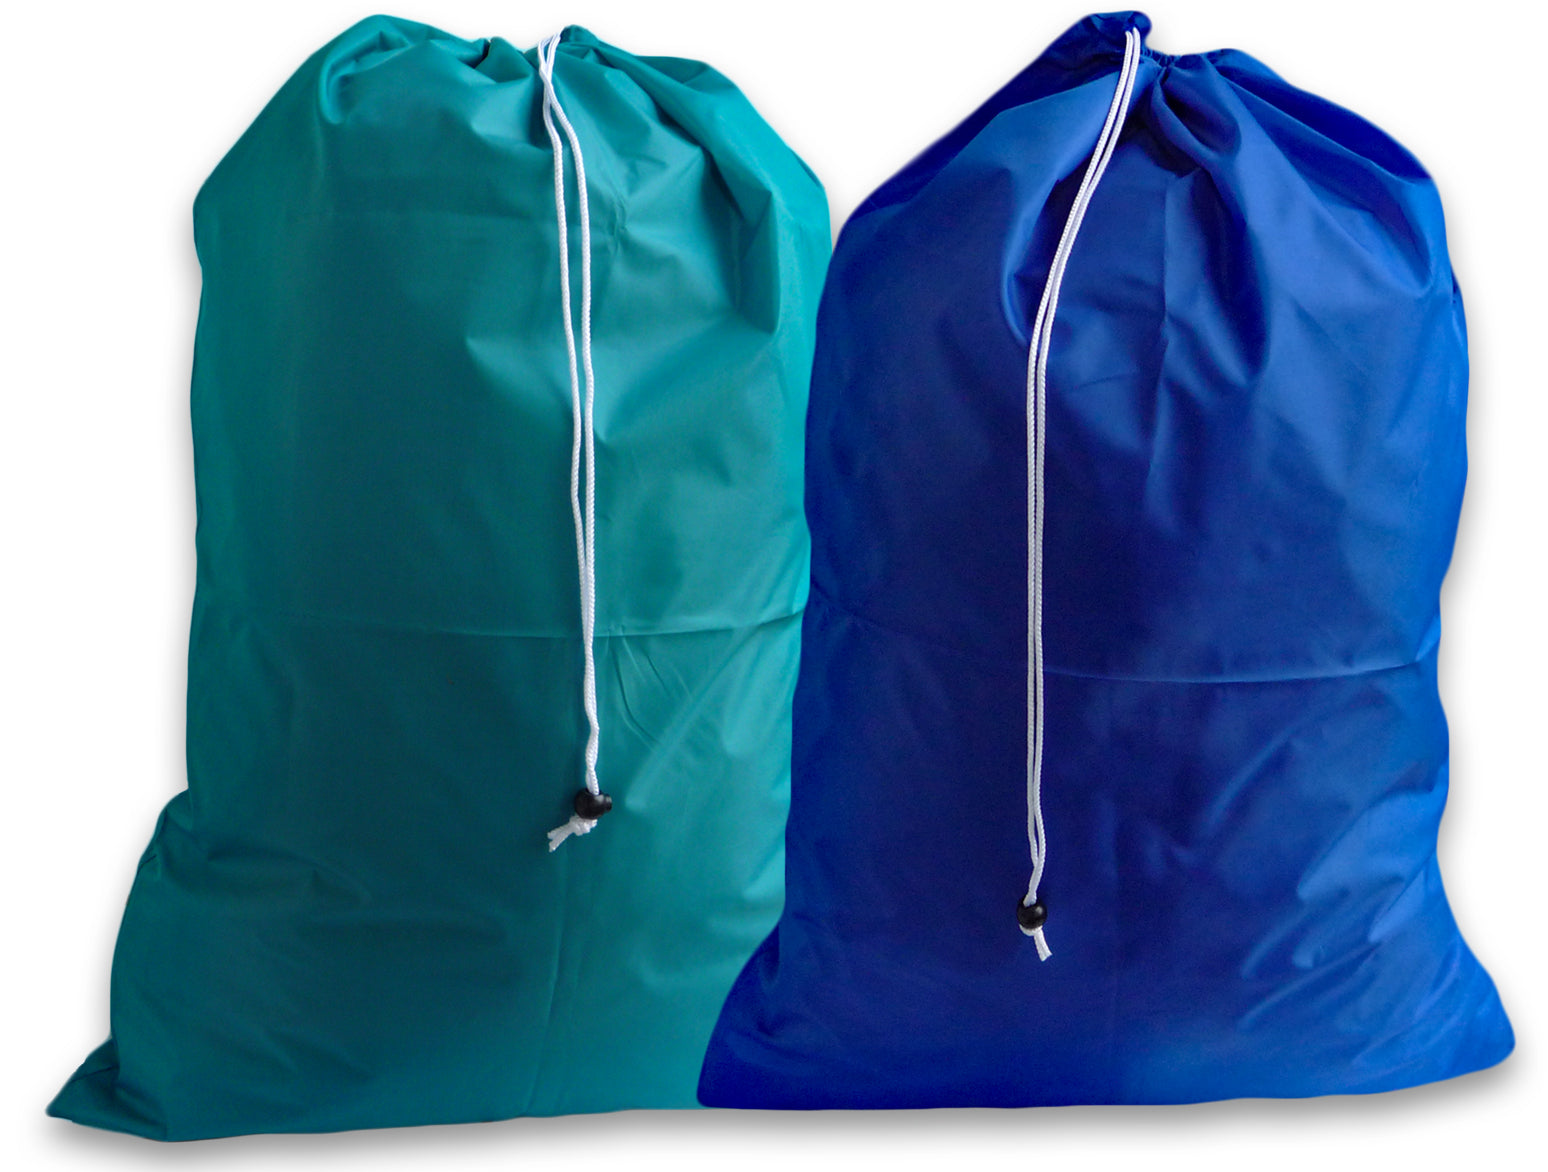 Extra Large Laundry Bags, Teal, Royal Blue, 2 Pack